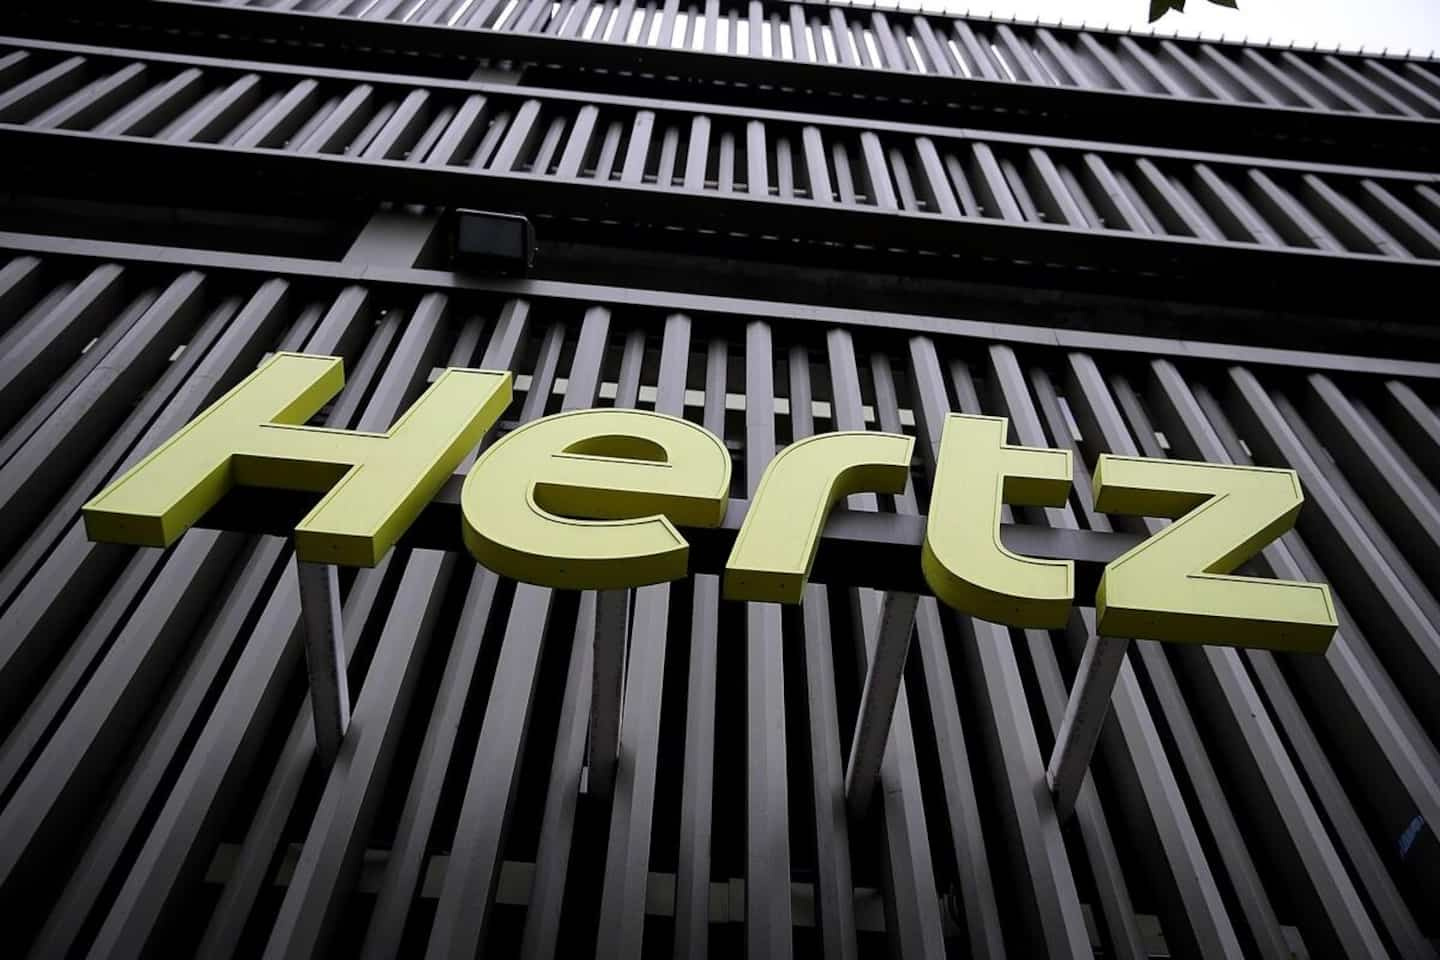 Hertz: A lawsuit from falsely arrested customers